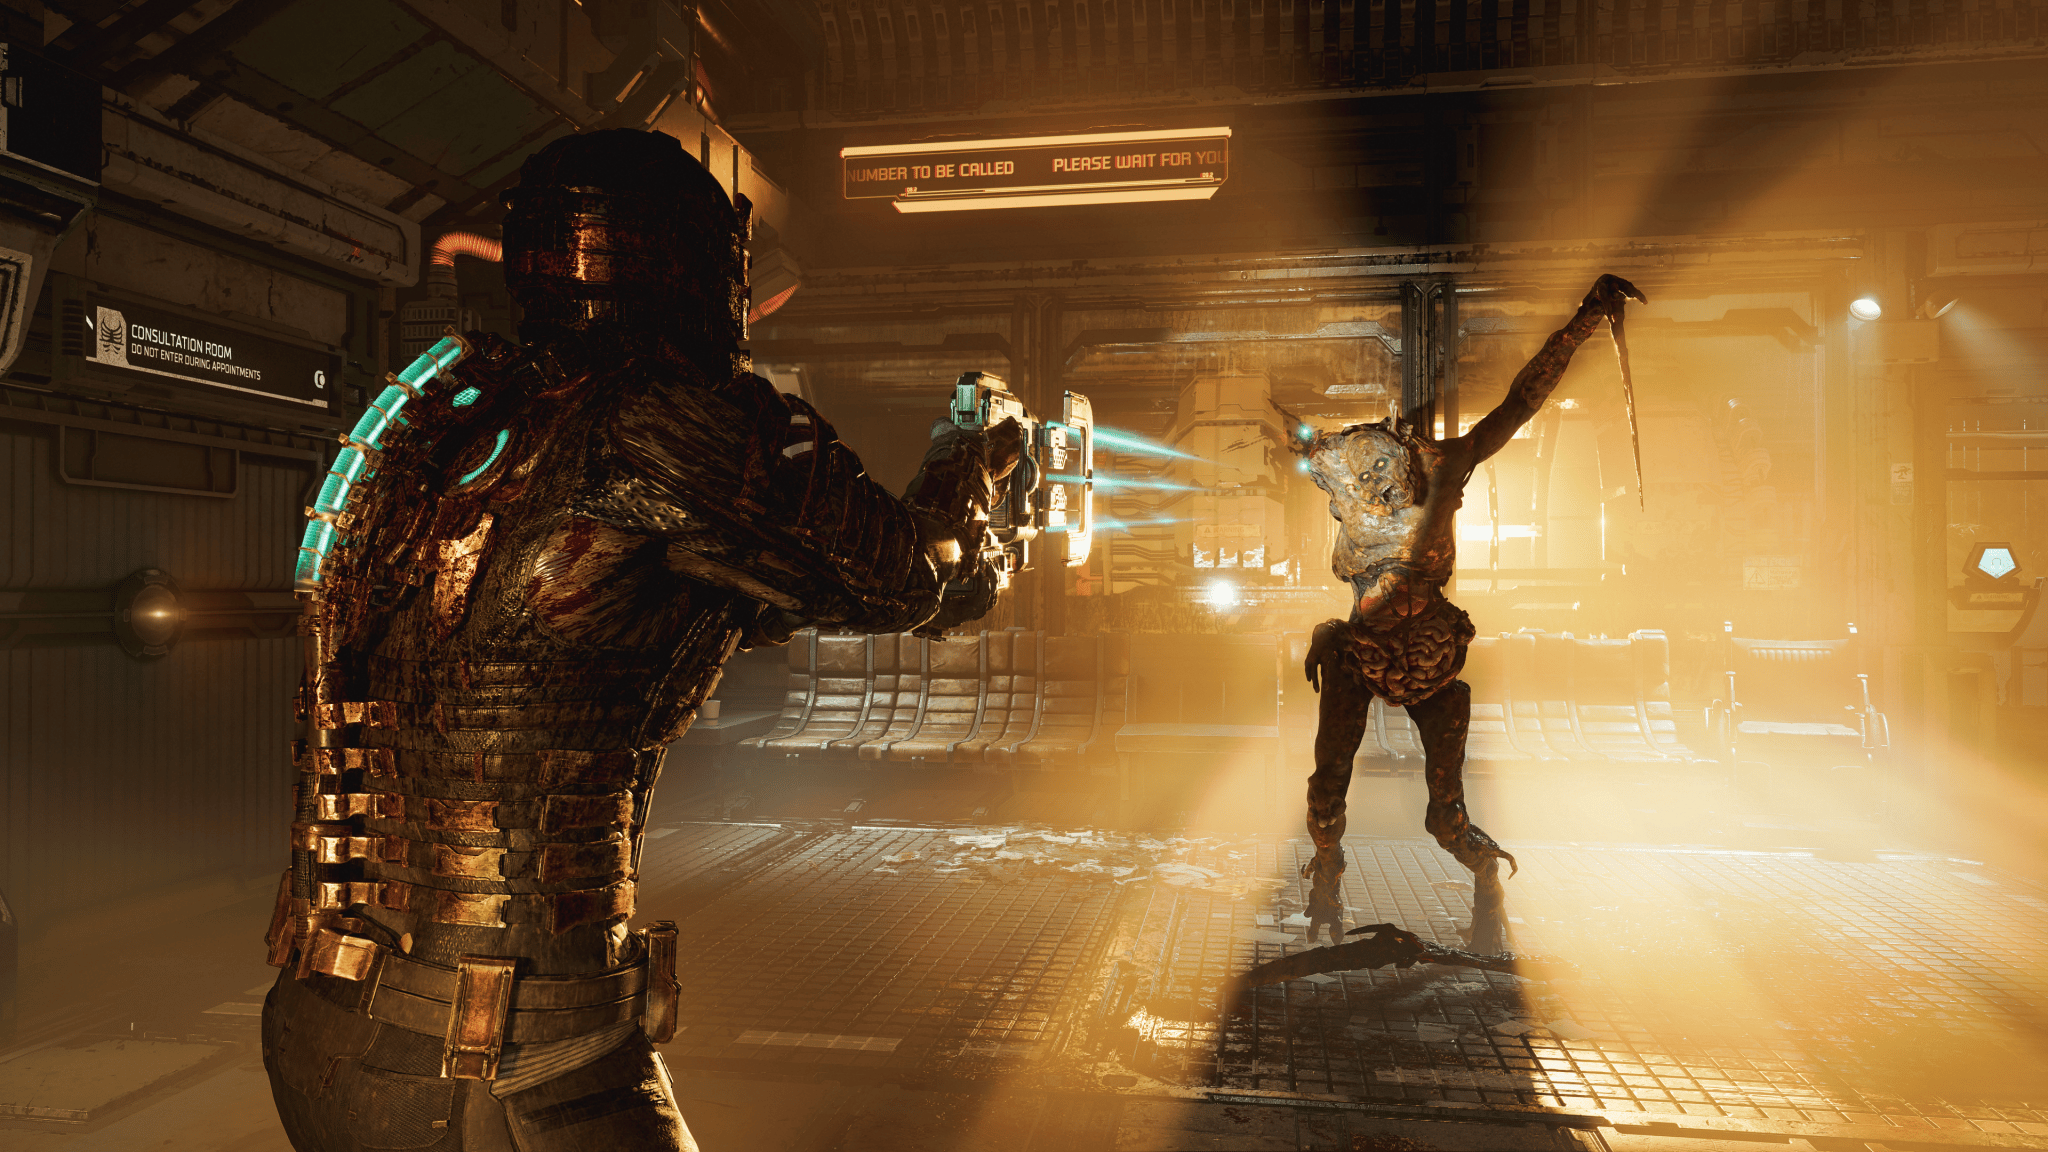 Dead Space Remake Reveals New Walkthrough Trailer Emphasizing Changes & Ambitious Vision